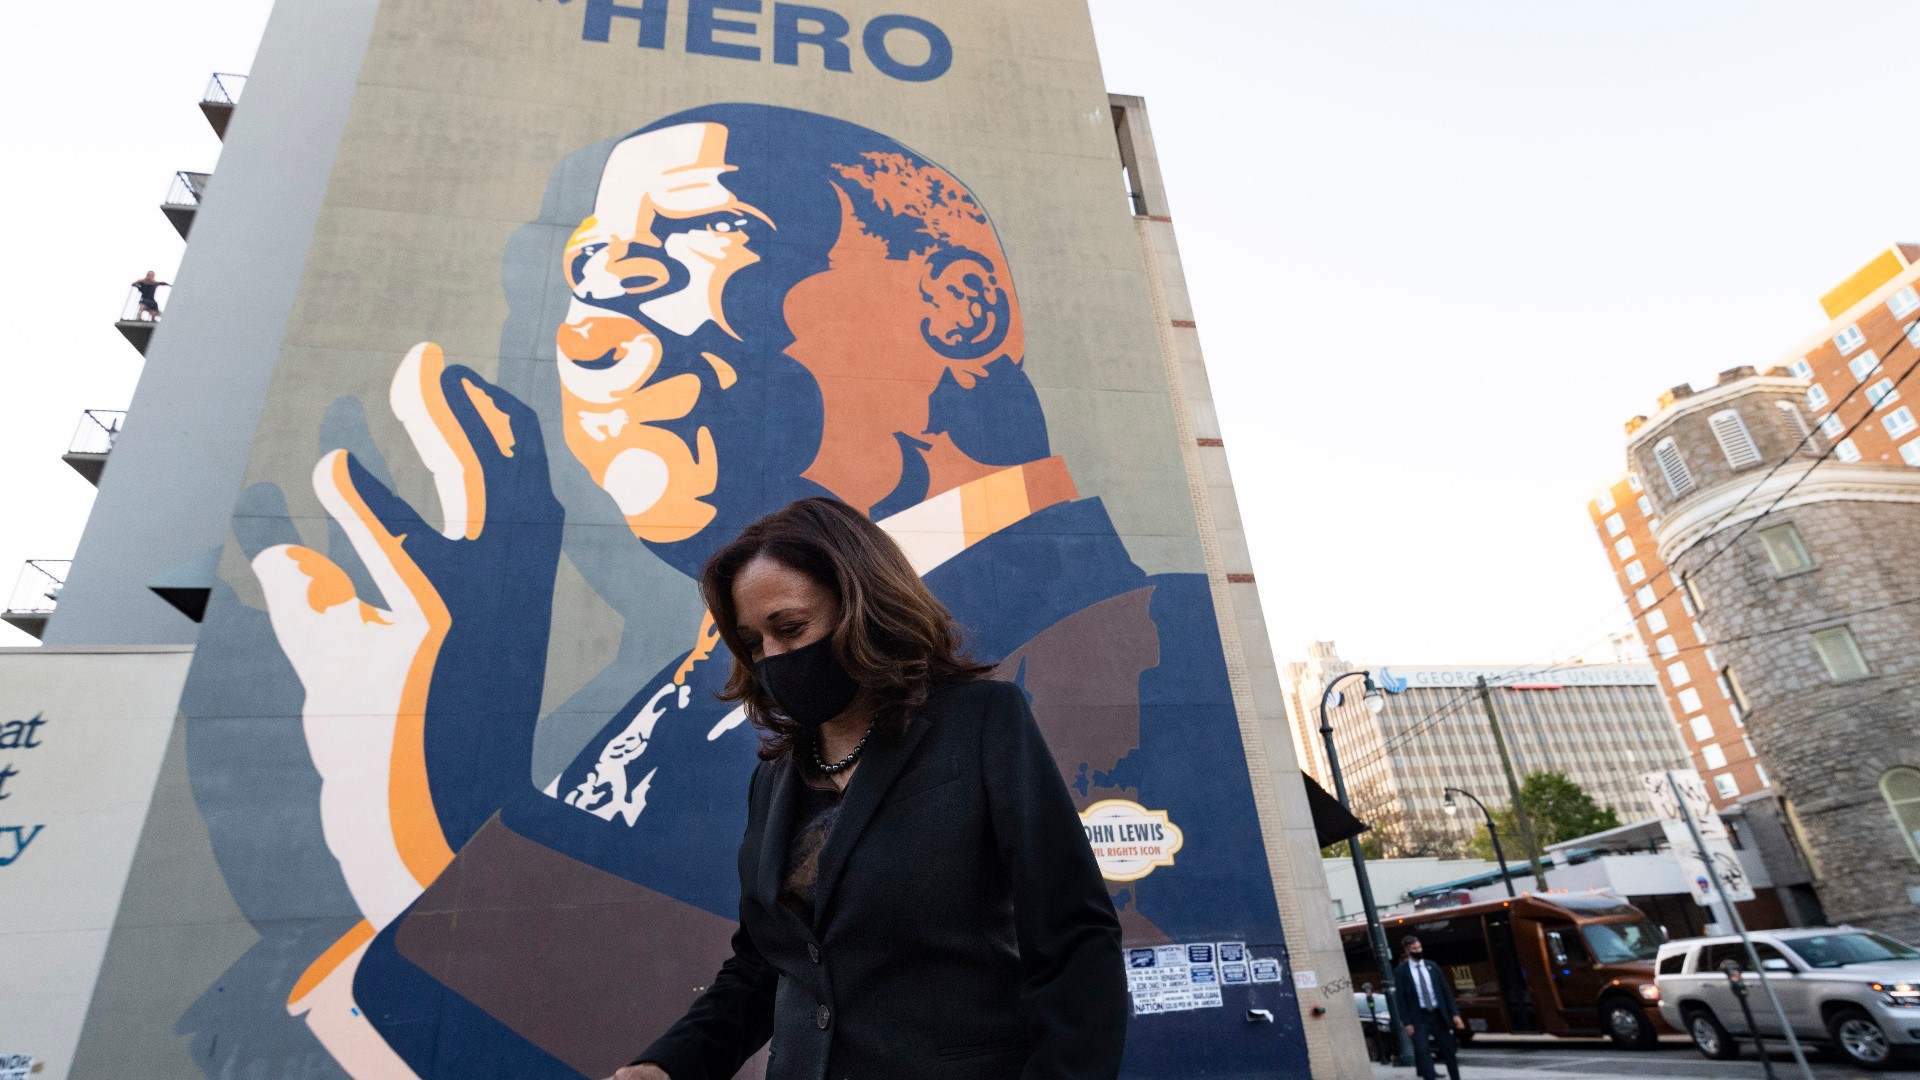 Sen. Kamala Harris took a moment to pay respects to the late-Congressman John Lewis at his towering mural during her visit.